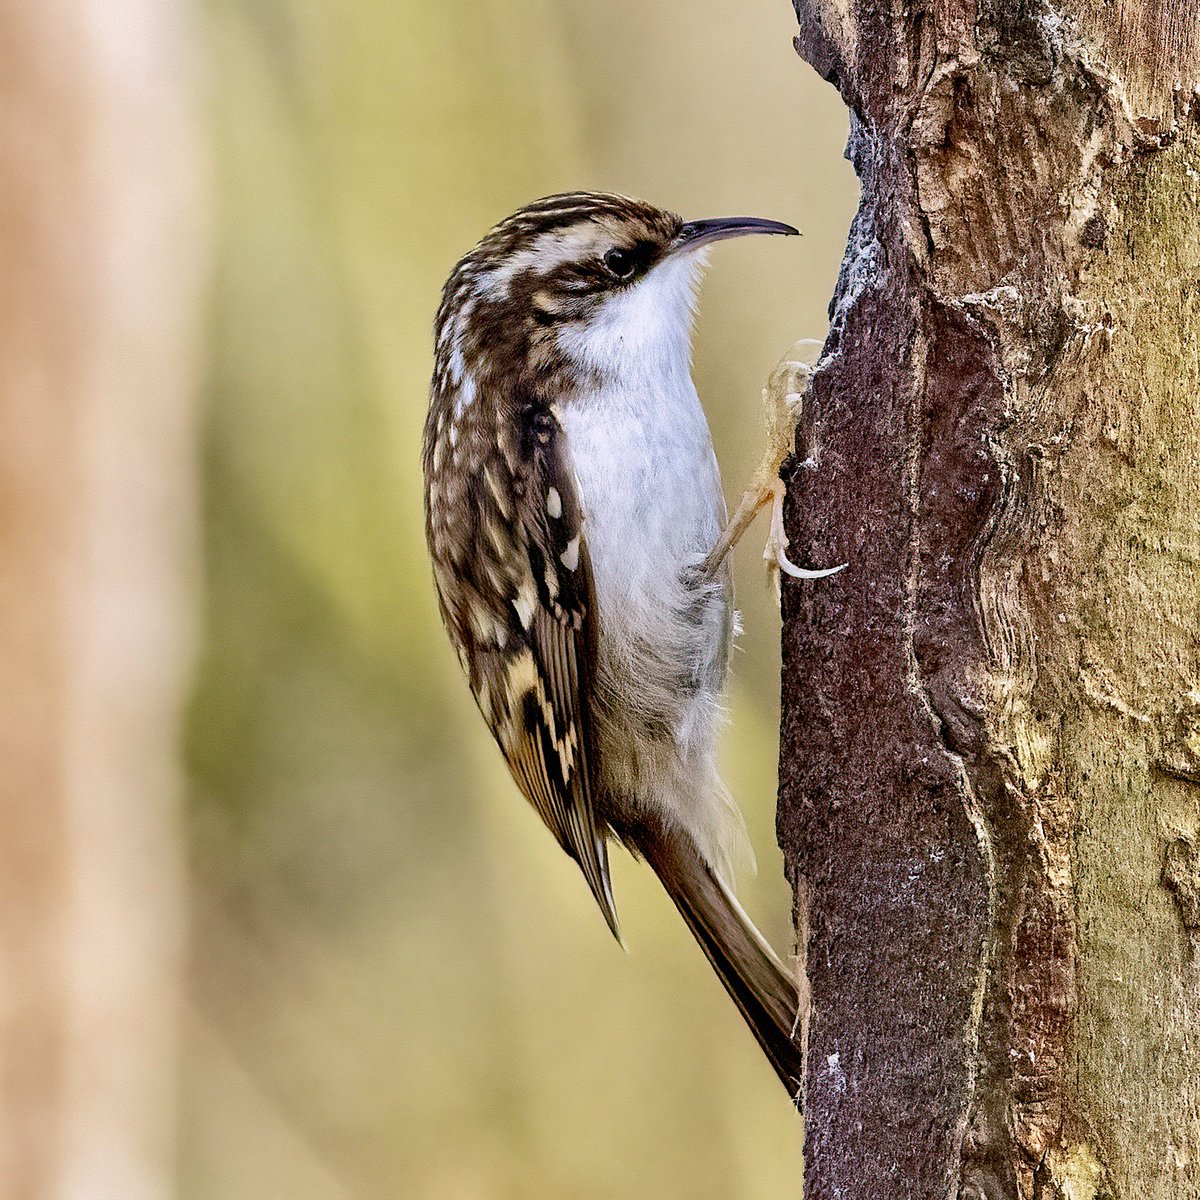 Tree creeper from today